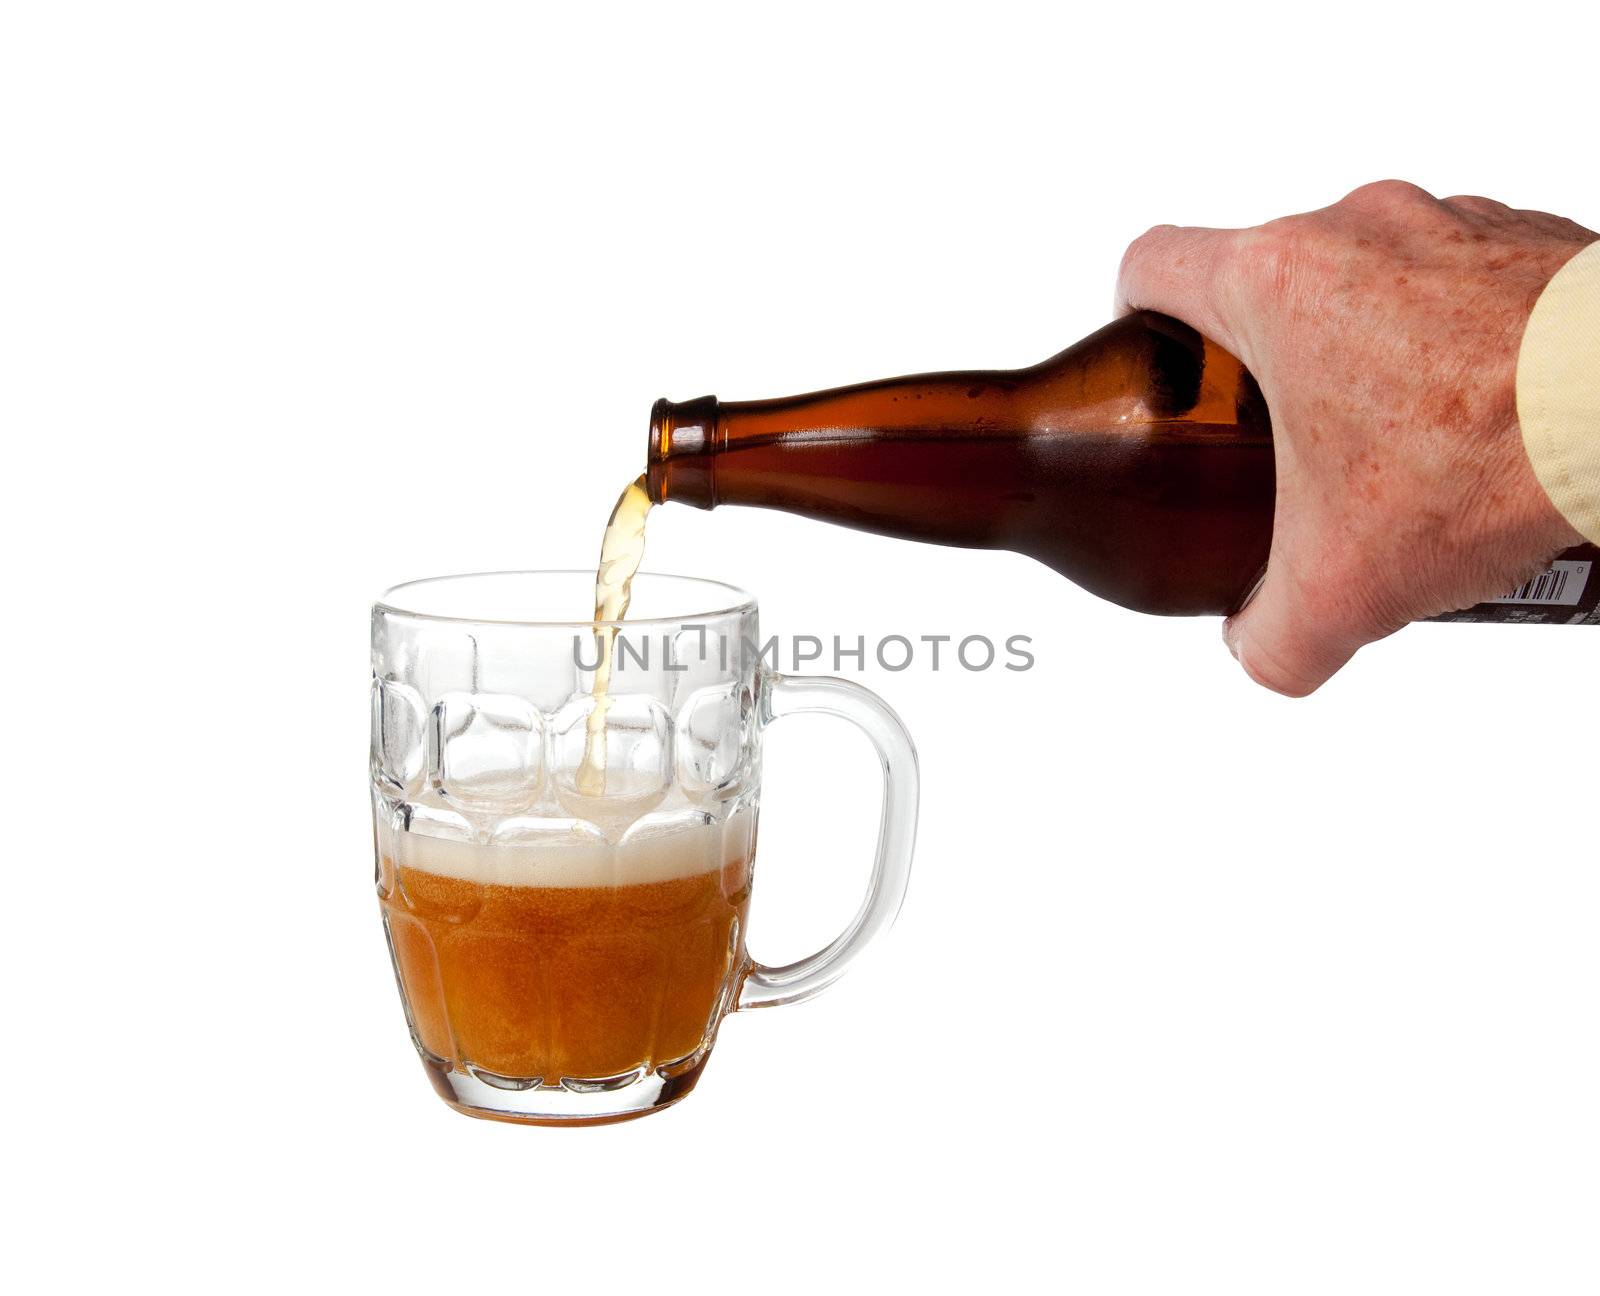 Beer being poured from bottle by steheap